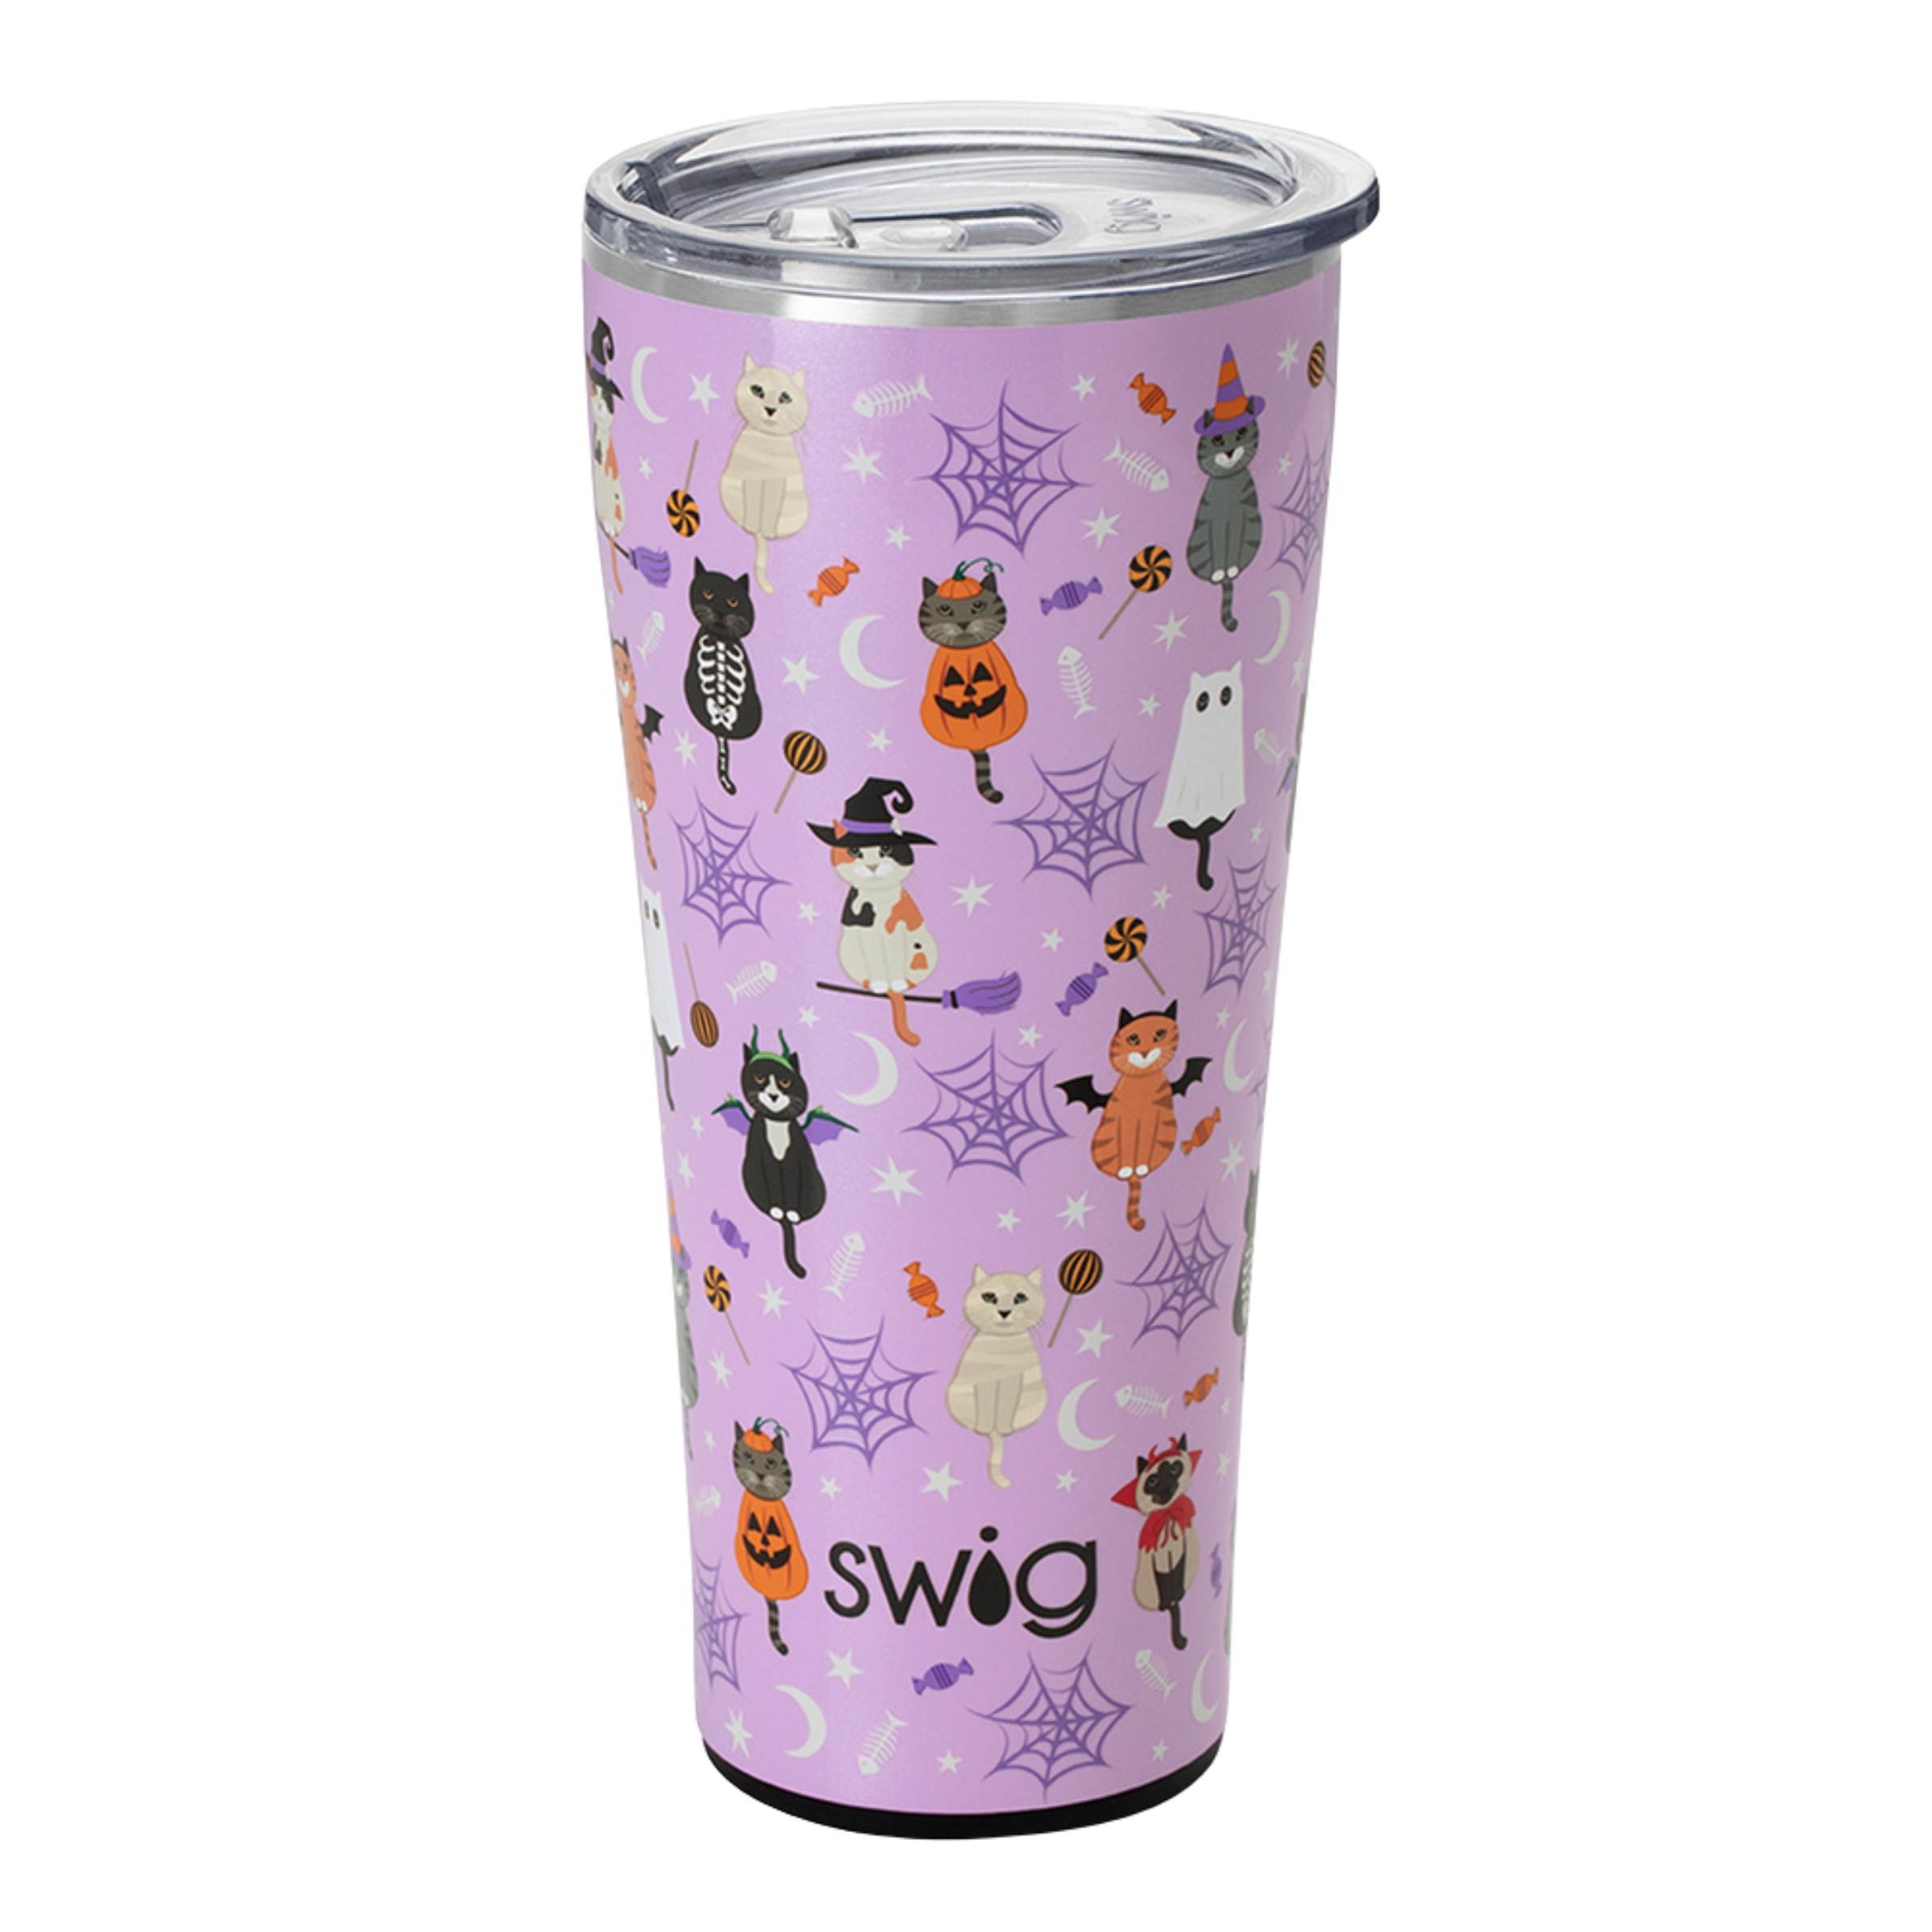 Scaredy cat halloween 32 oz tumbler. The cup is purple with Halloween themed cat decorations. The background of the picture is white.